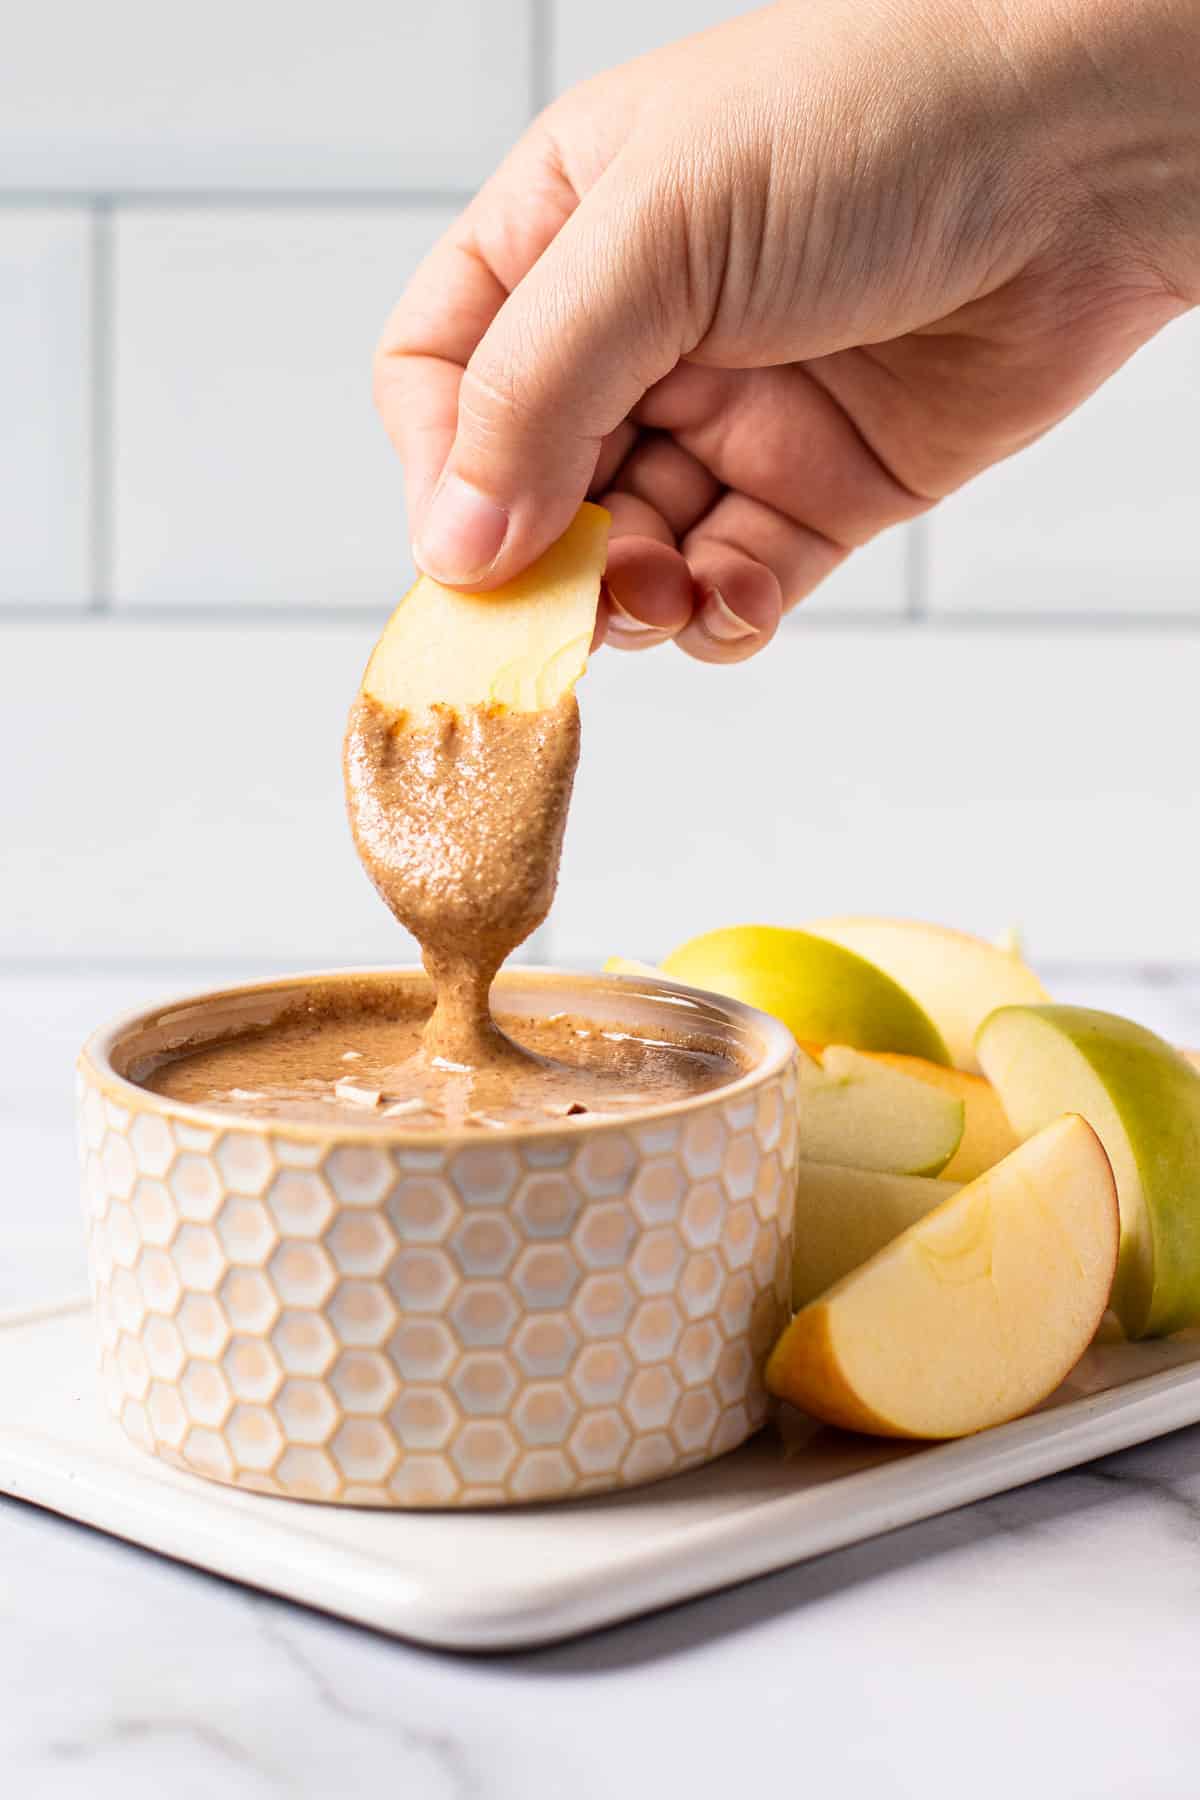 A dipped apple in almond butter.